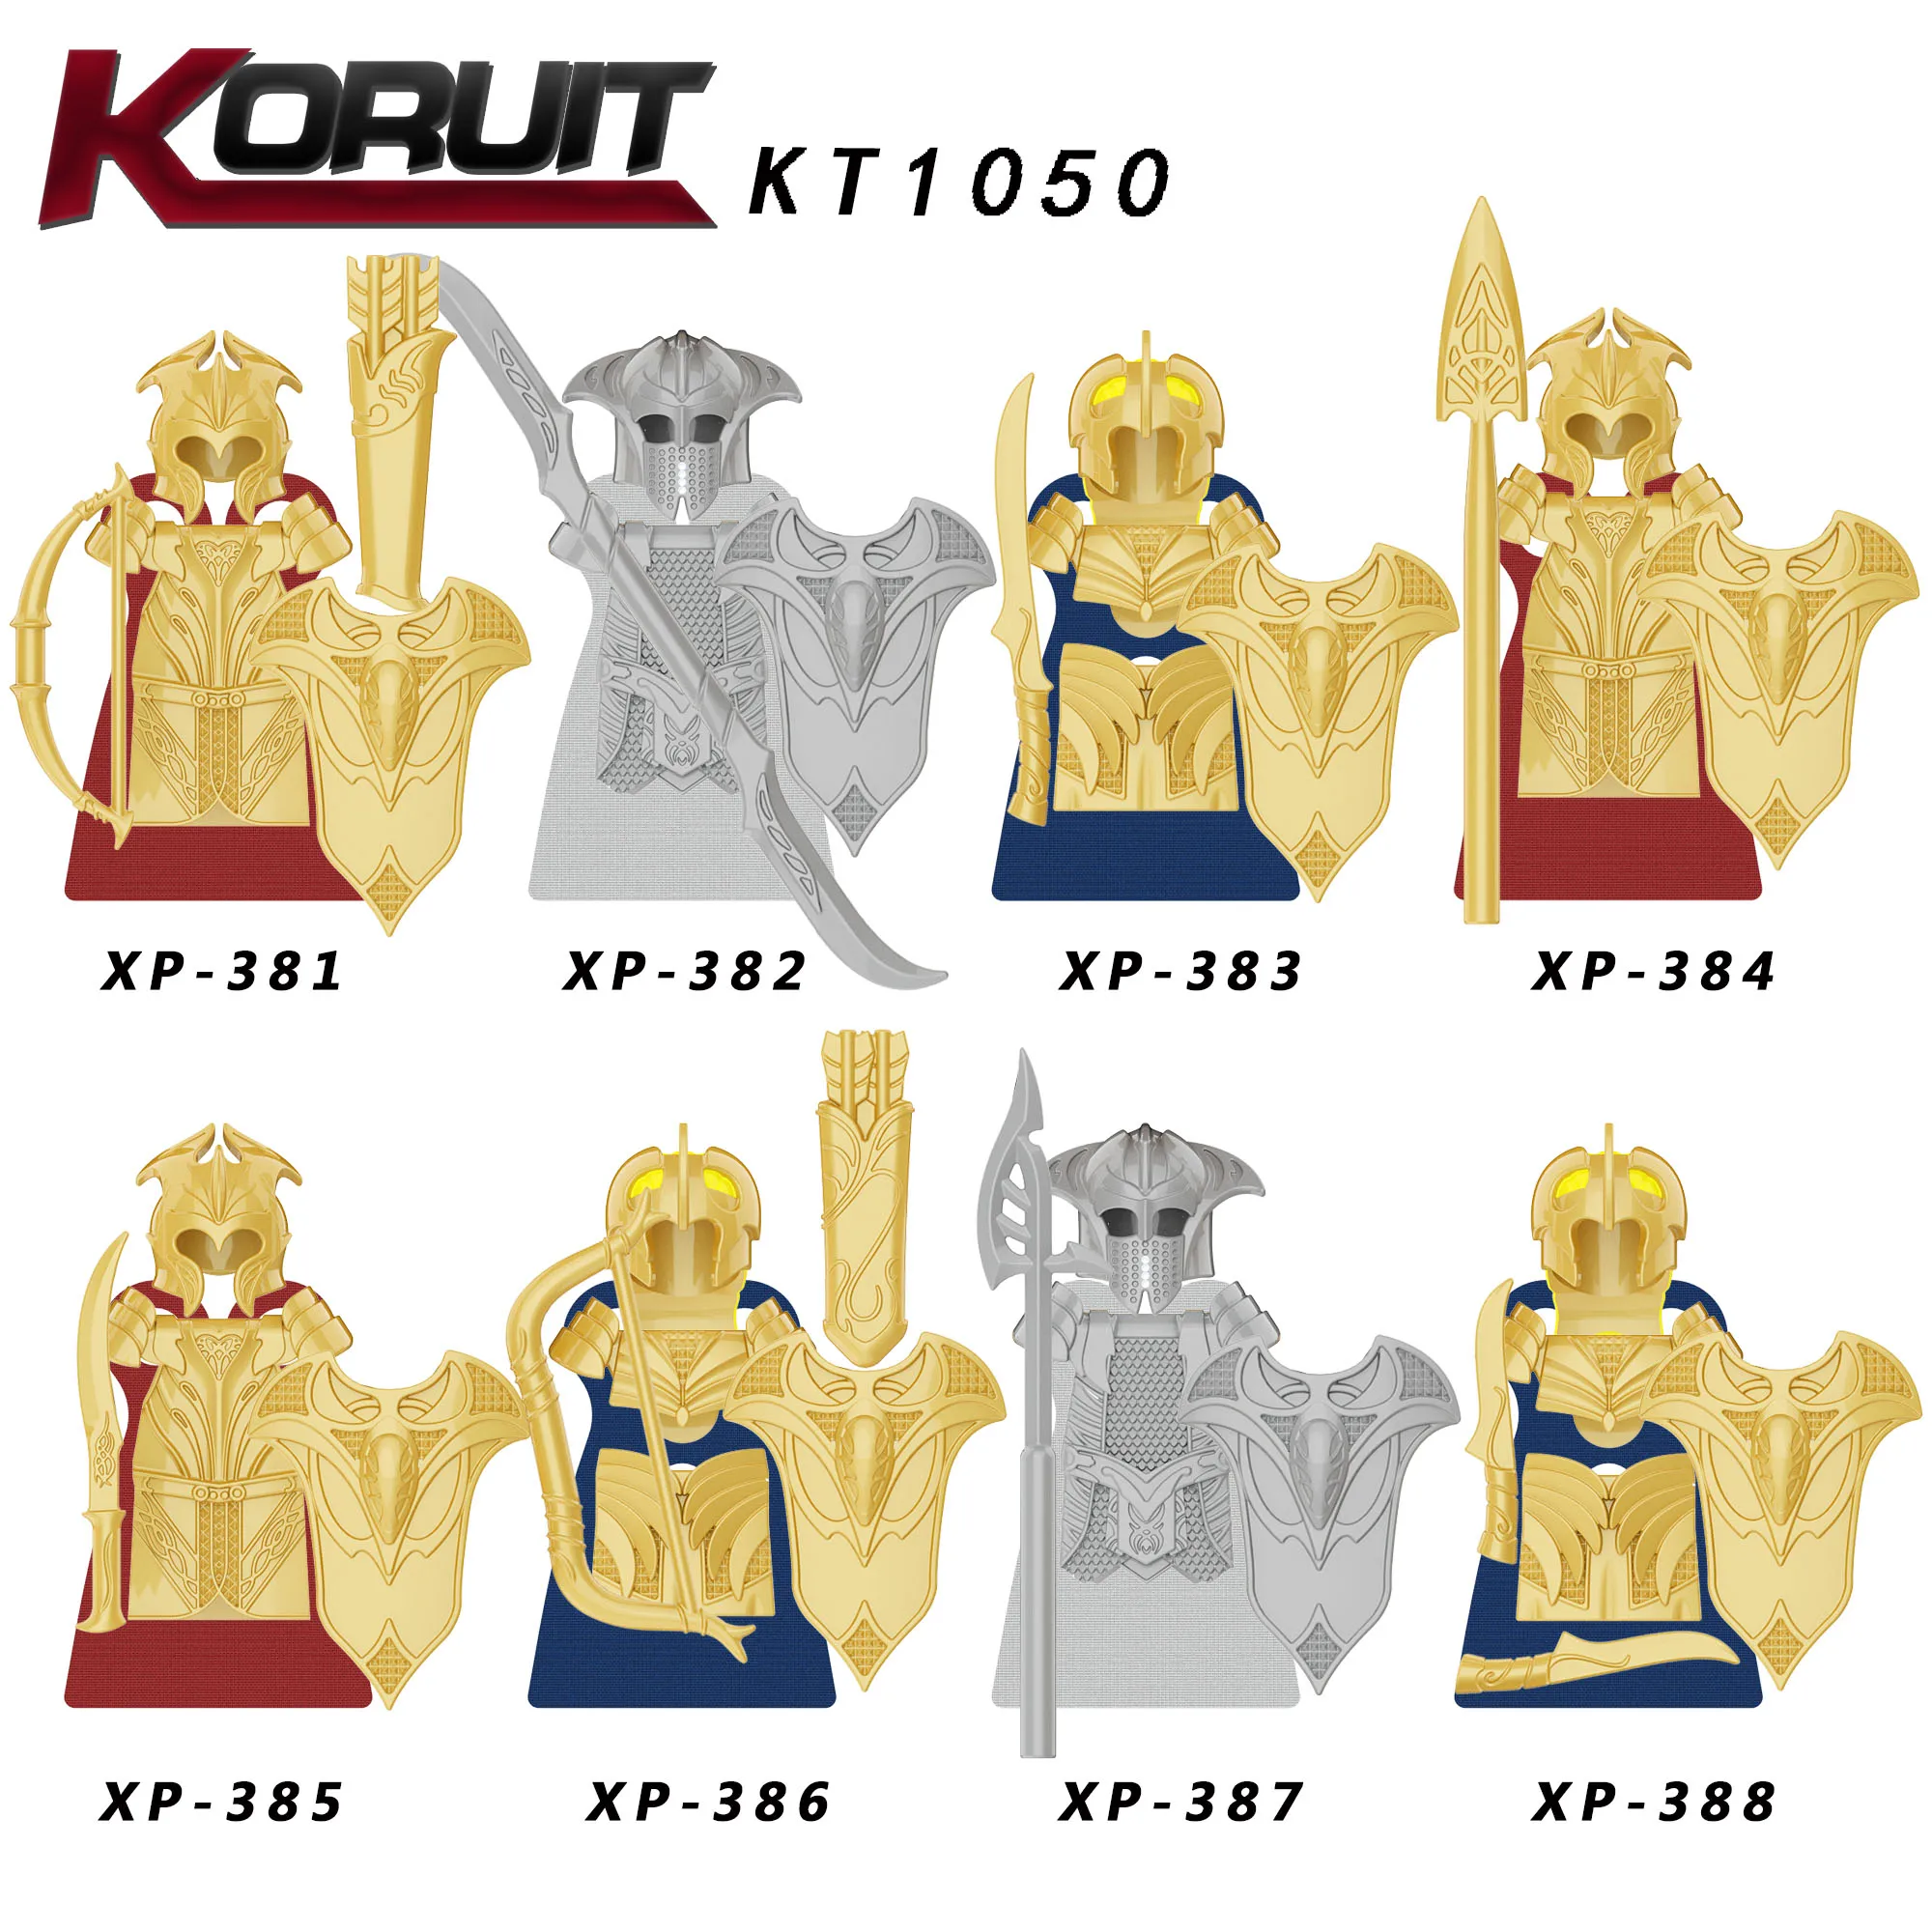 

1PCS LOTR Elves Soldier Orcs Army Figures Armor Guard Warrior Archer Medieval Knights Building Blocks Bricks toys for kid gifts